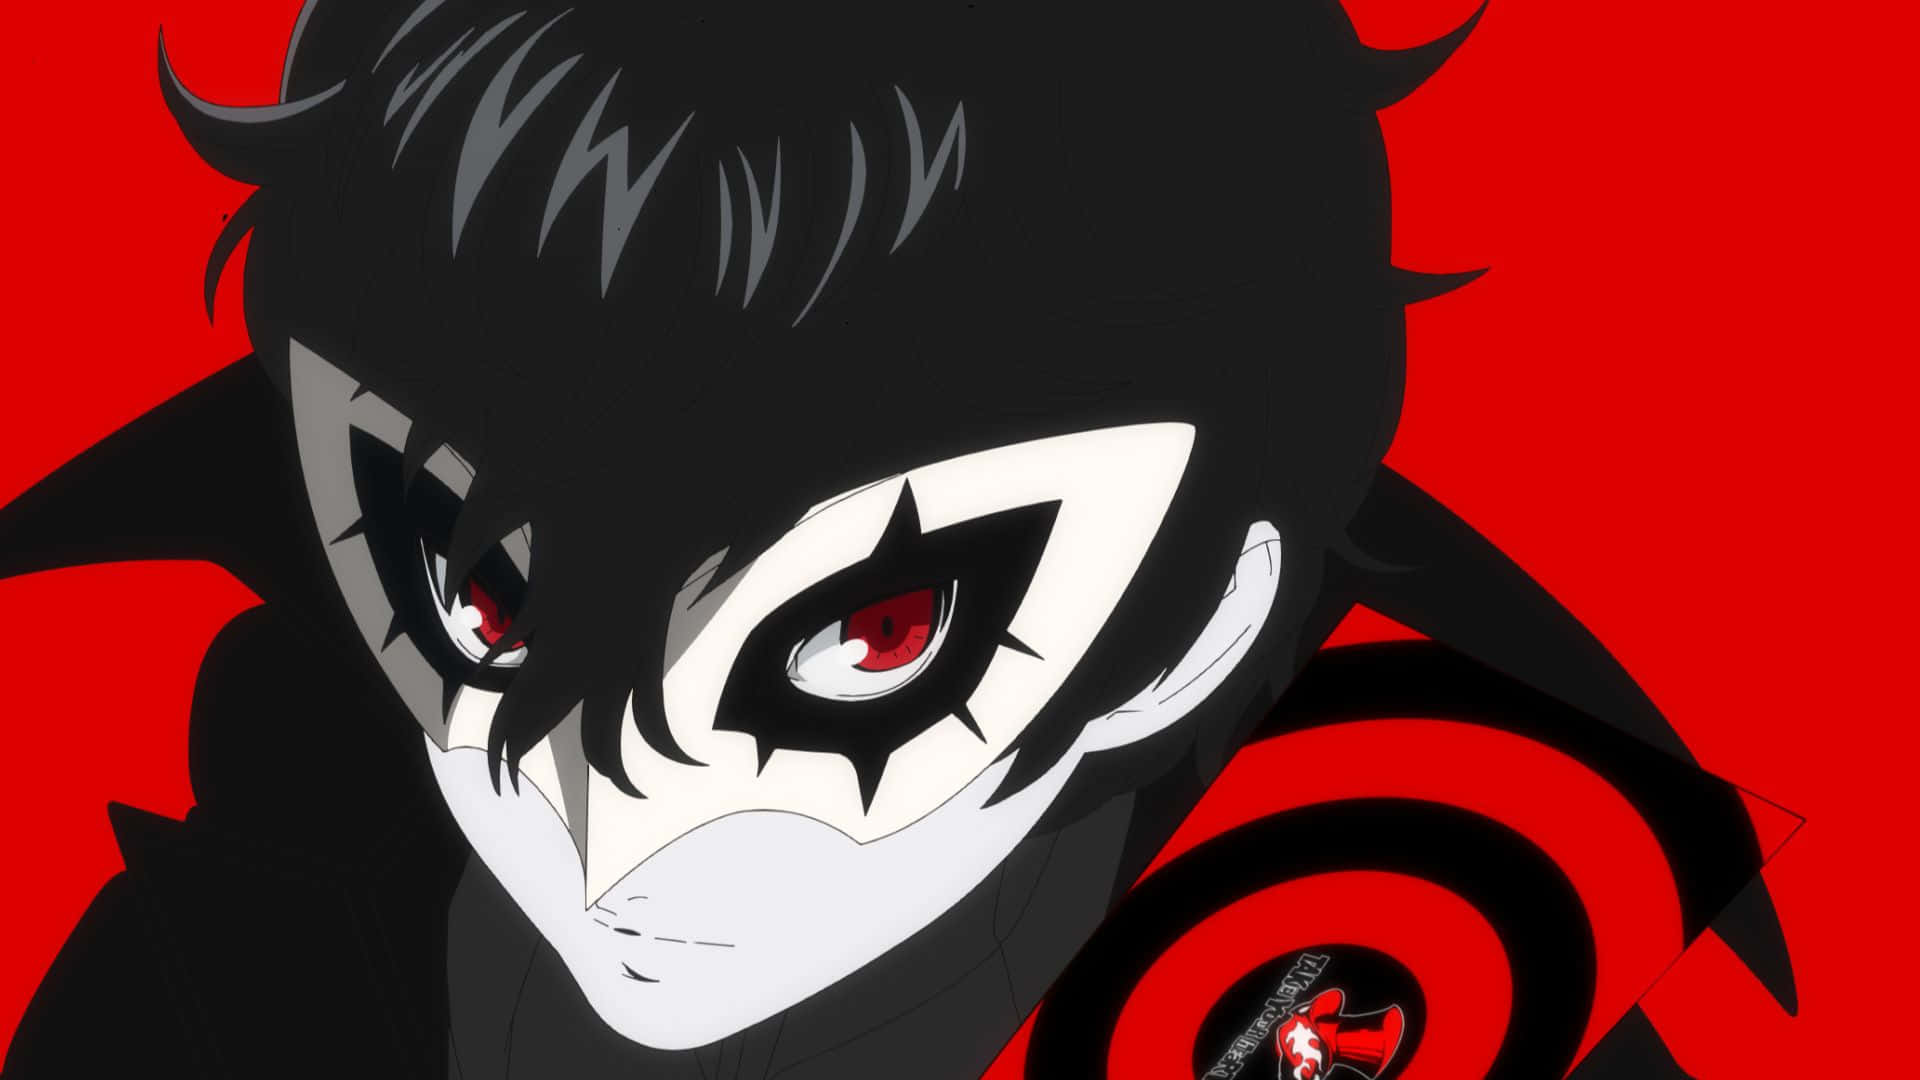 Get ahead of the game with Joker Persona 5! Wallpaper